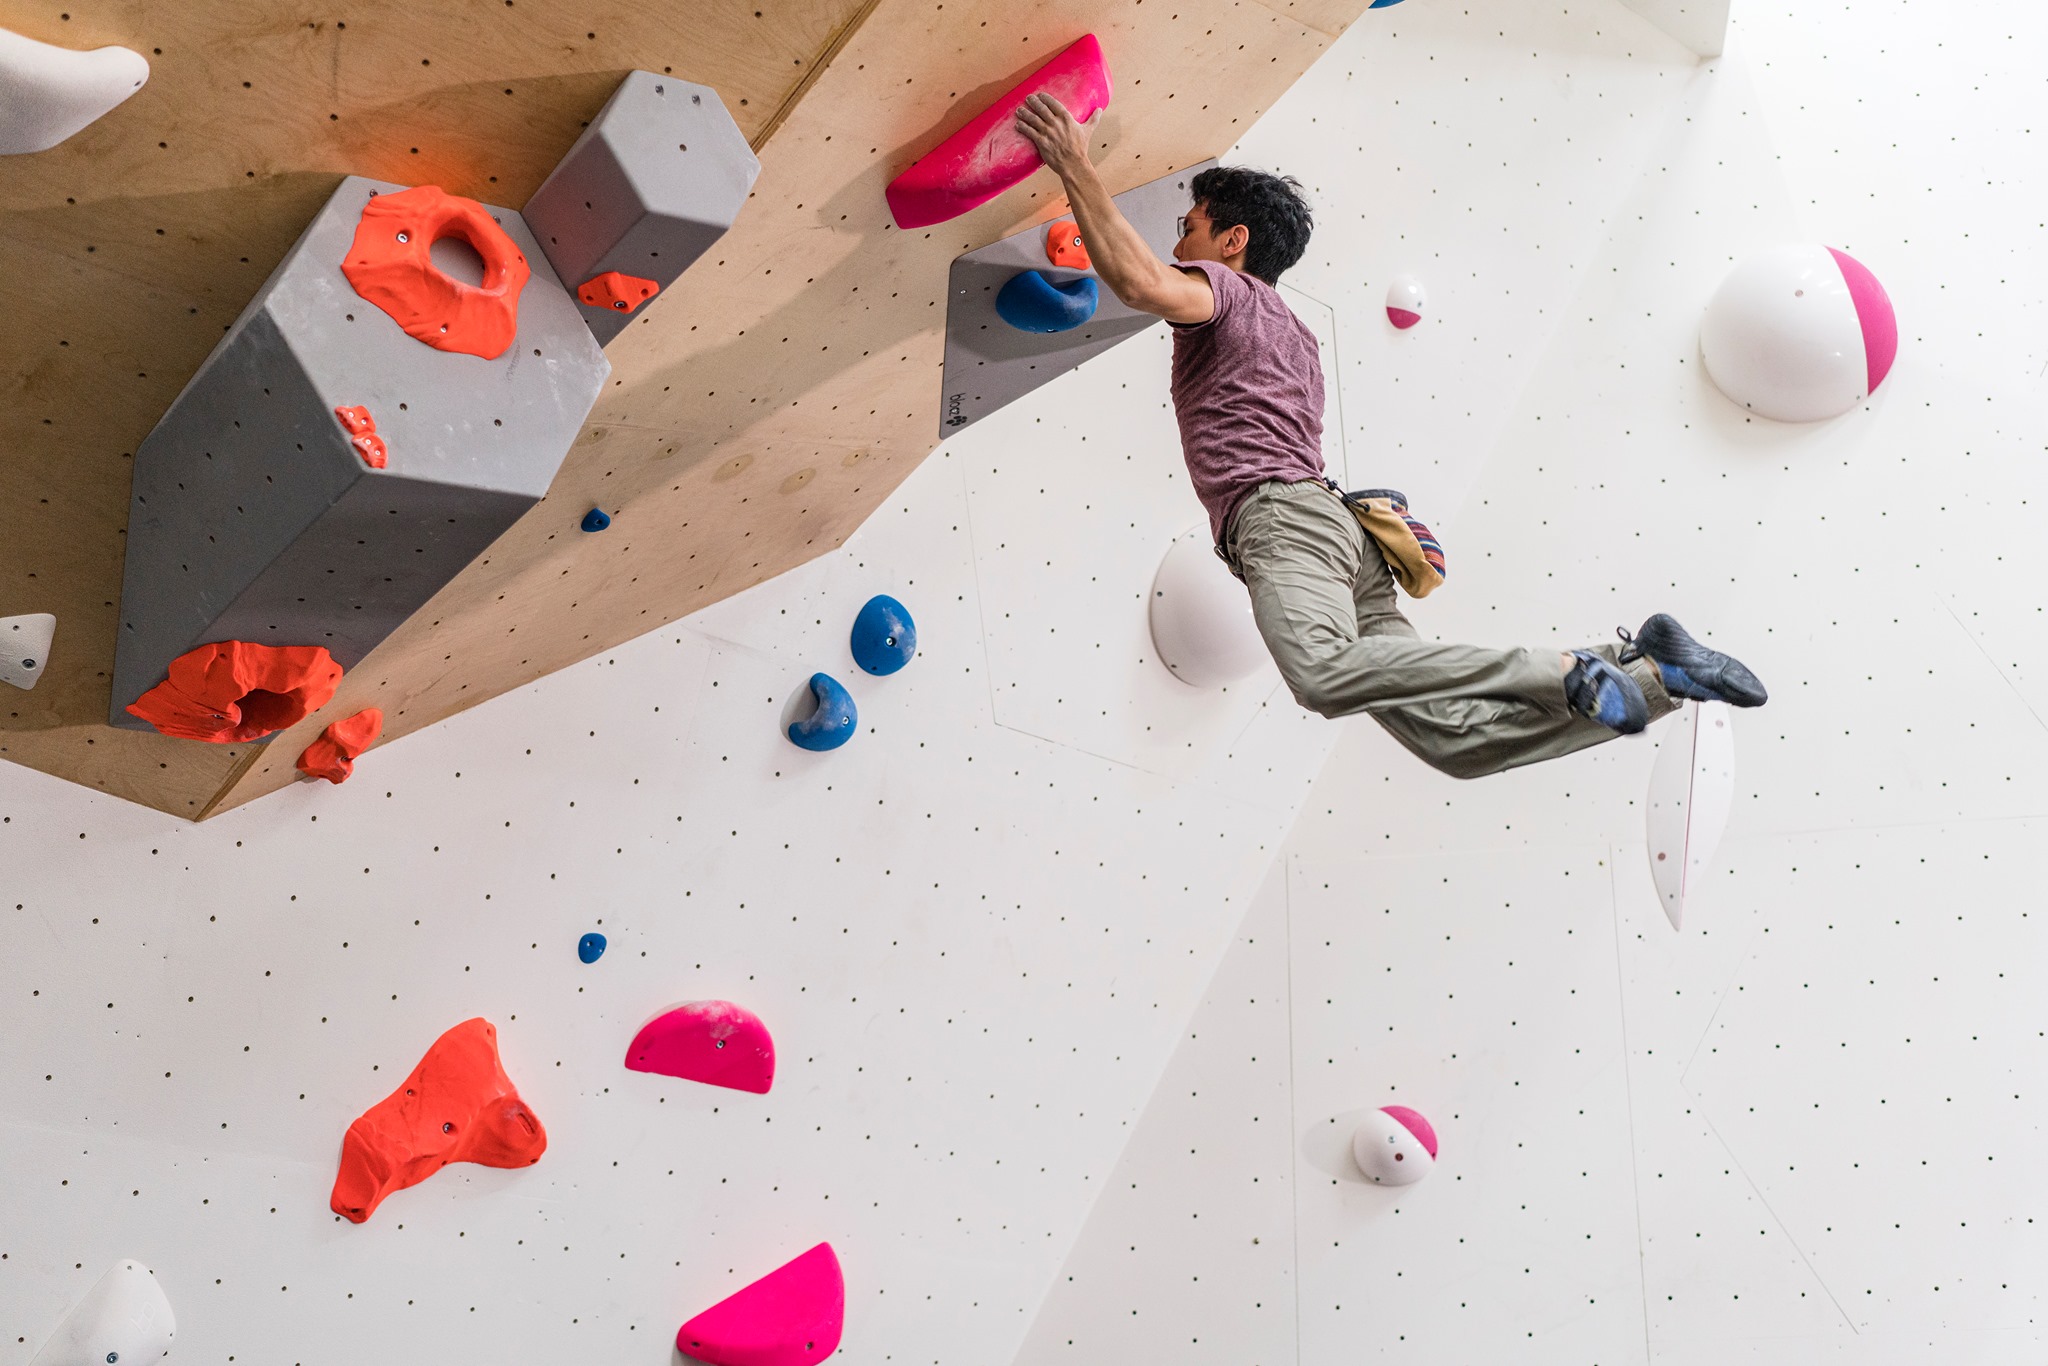 DISCOVER: The Bouldering Hive, the Philippines’ First Bouldering-Only Gym!